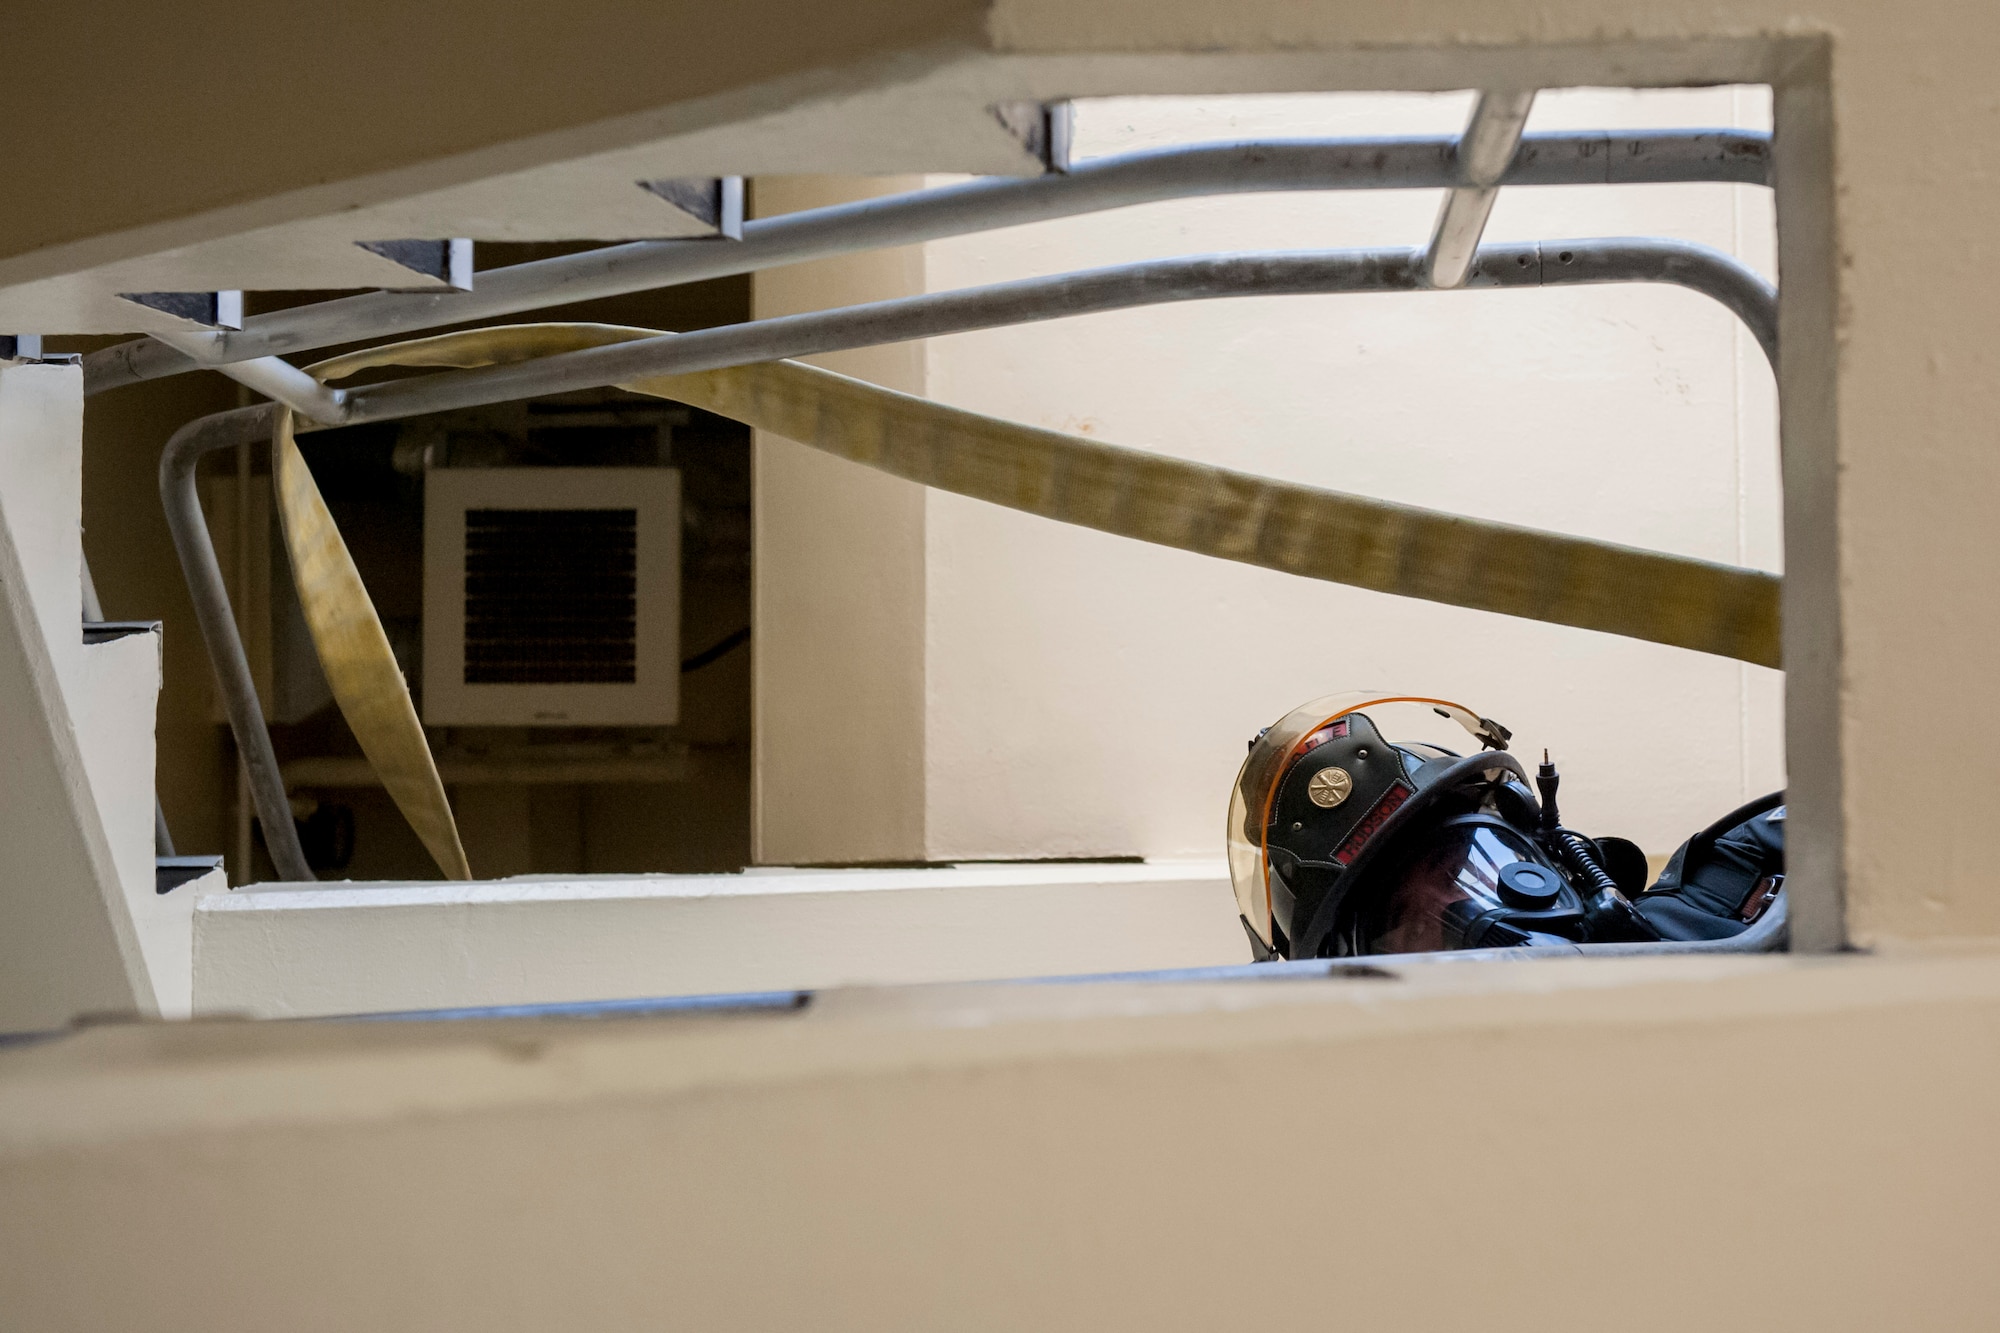 Senior Airman Brandon Hudson, 18th Civil Engineer Squadron firefighter, looks down a stairwell during a tower evacuation drill Aug. 15, 2016, at Kadena Air Base, Japan. Hudson and other firefighters of the 18th CES conduct fire and rescue exercises twice per week in order to remain ready day and night for possible emergencies. (U.S. Air Force photo by Senior Airman Peter Reft)